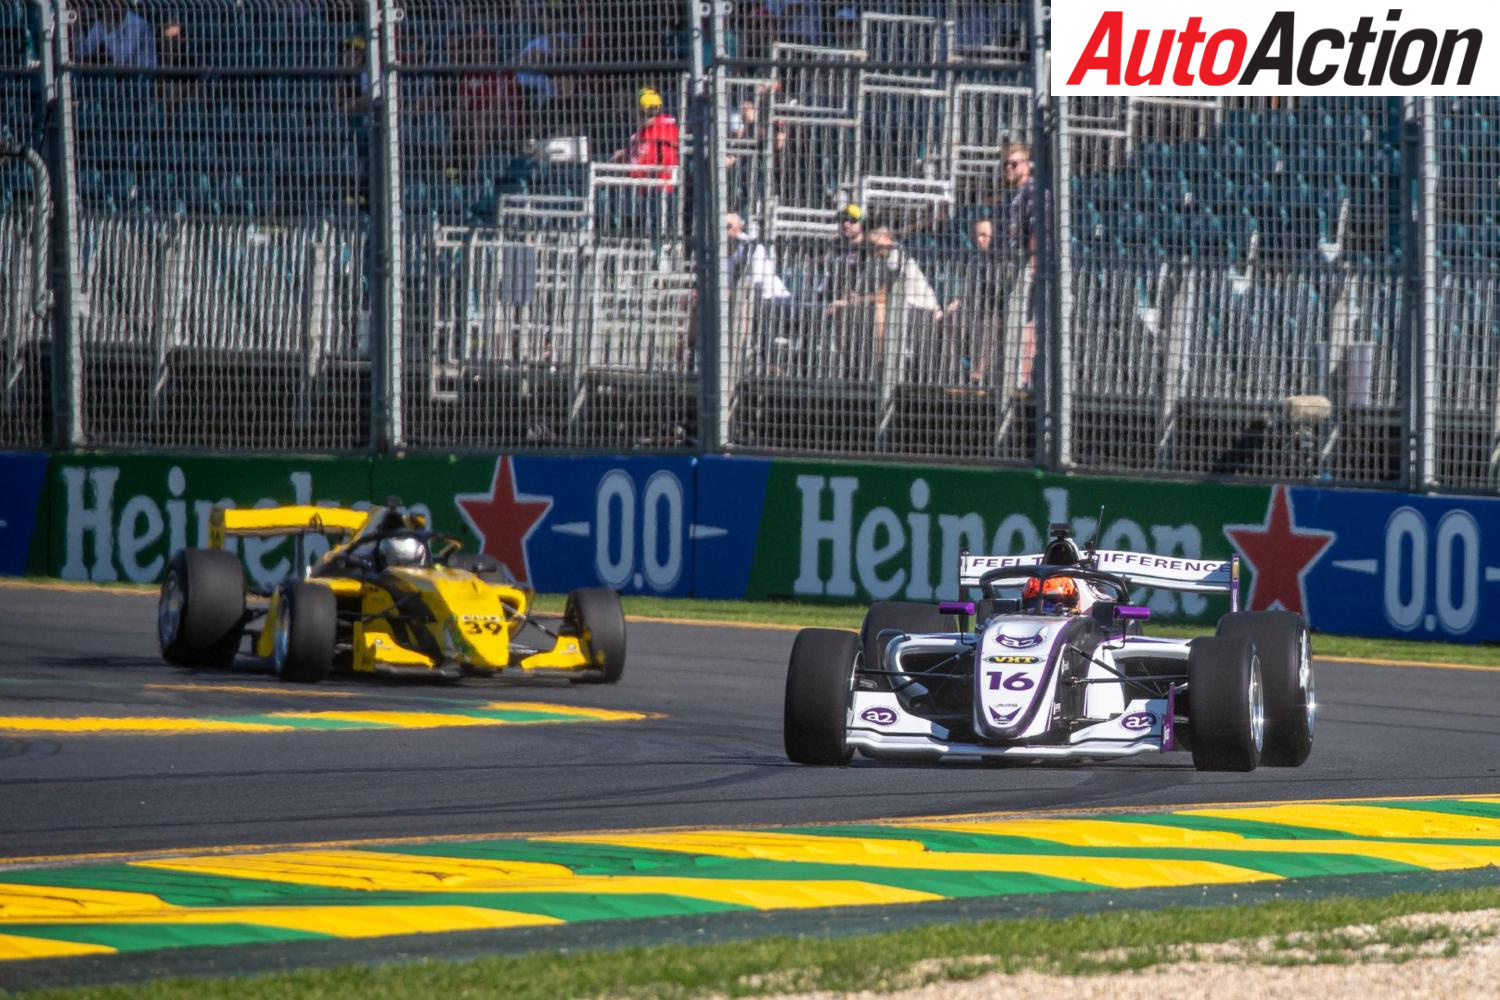 Væve største Spanien AUTO ACTION'S CALL FOR AN AUSTRALIAN GRAND PRIX IN 2020 - Auto Action